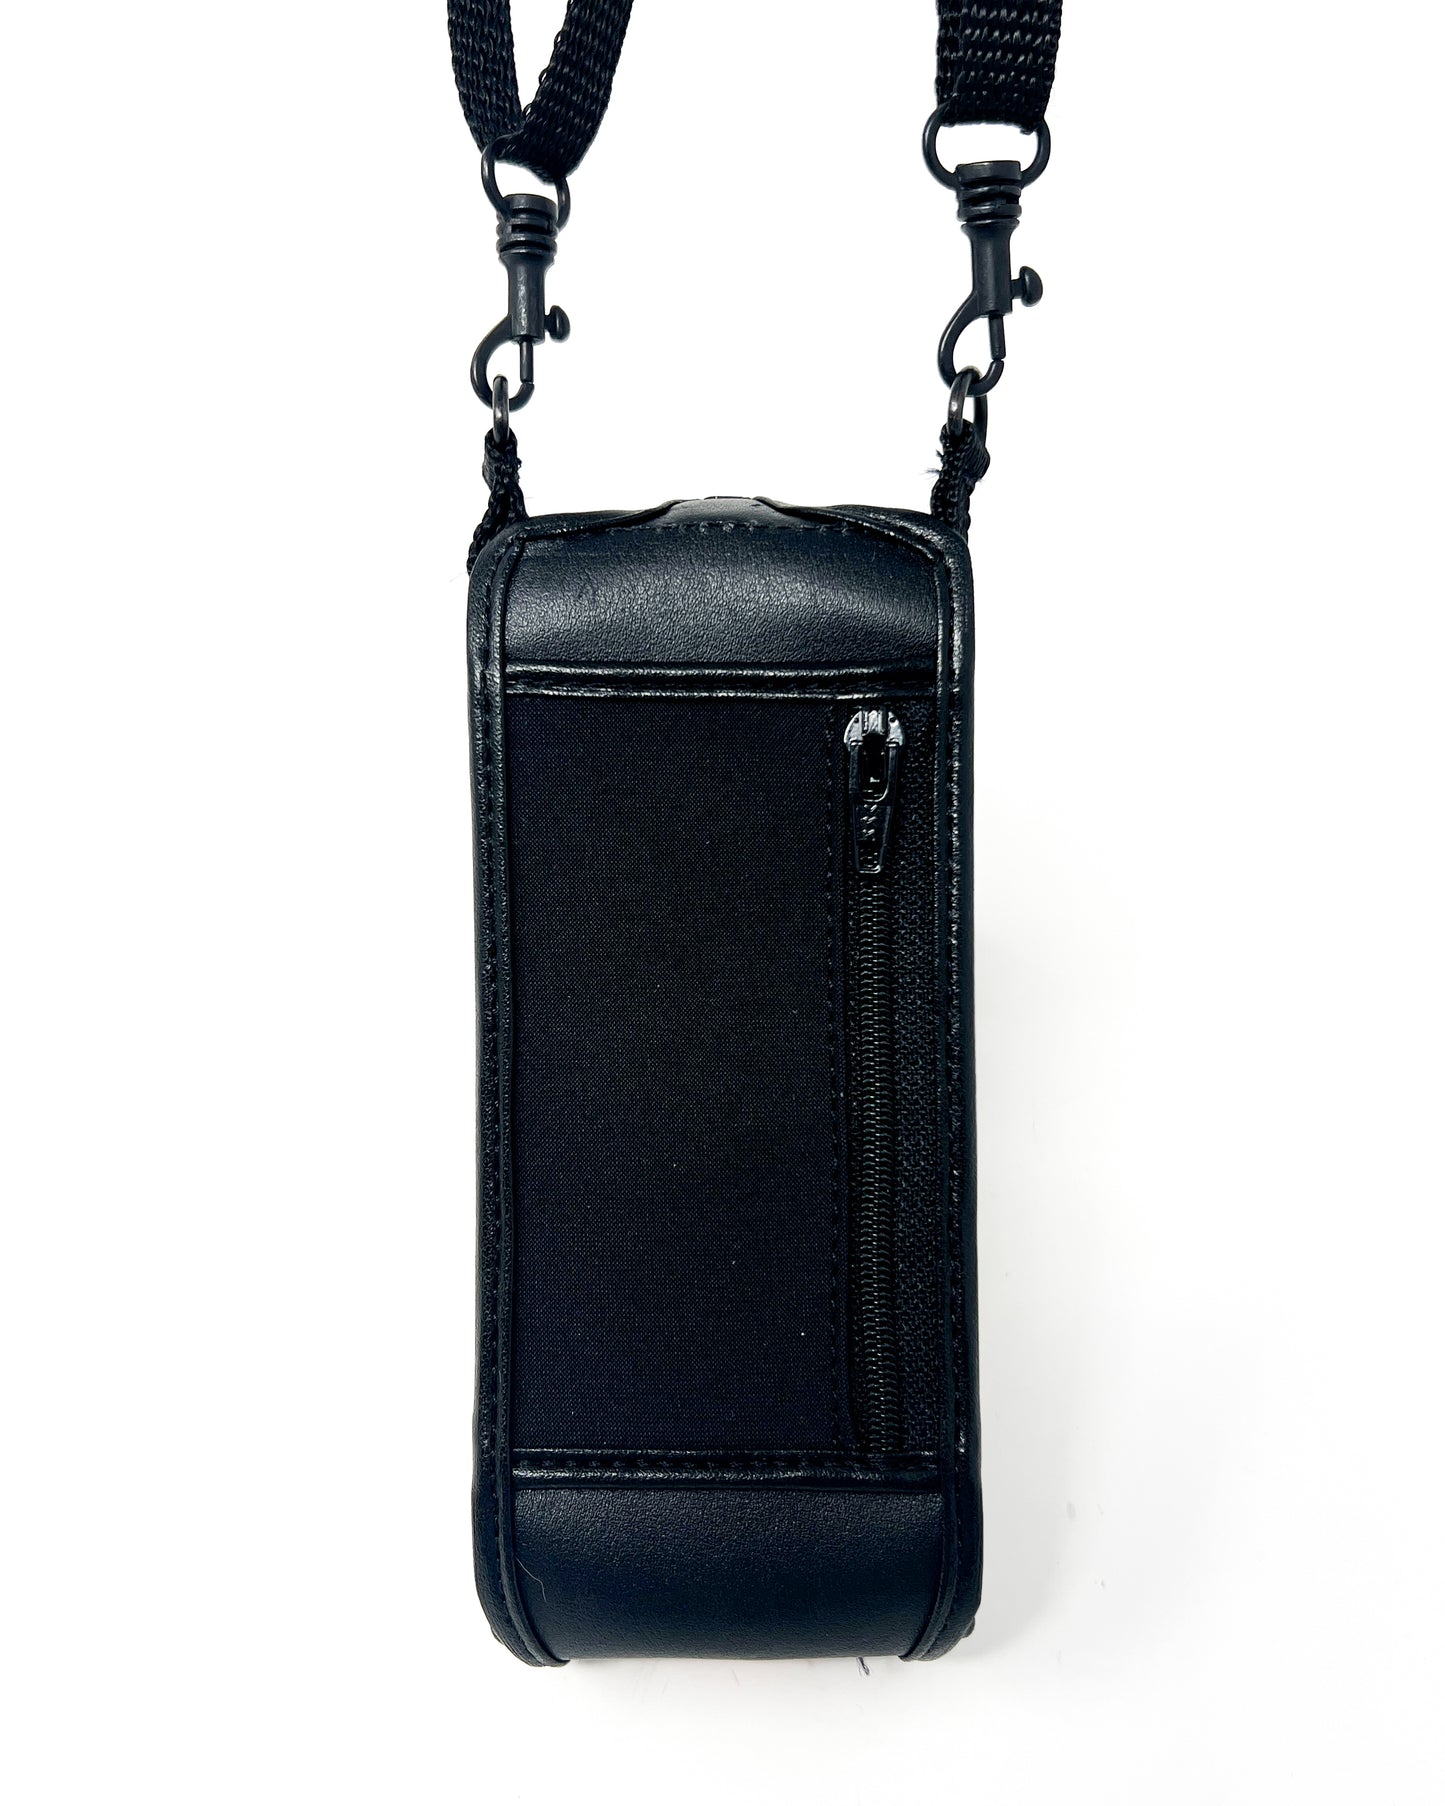 BlindShell Classic 2 Phone Fitted Leather Case with Protective Key Cover and strap by Turtleback